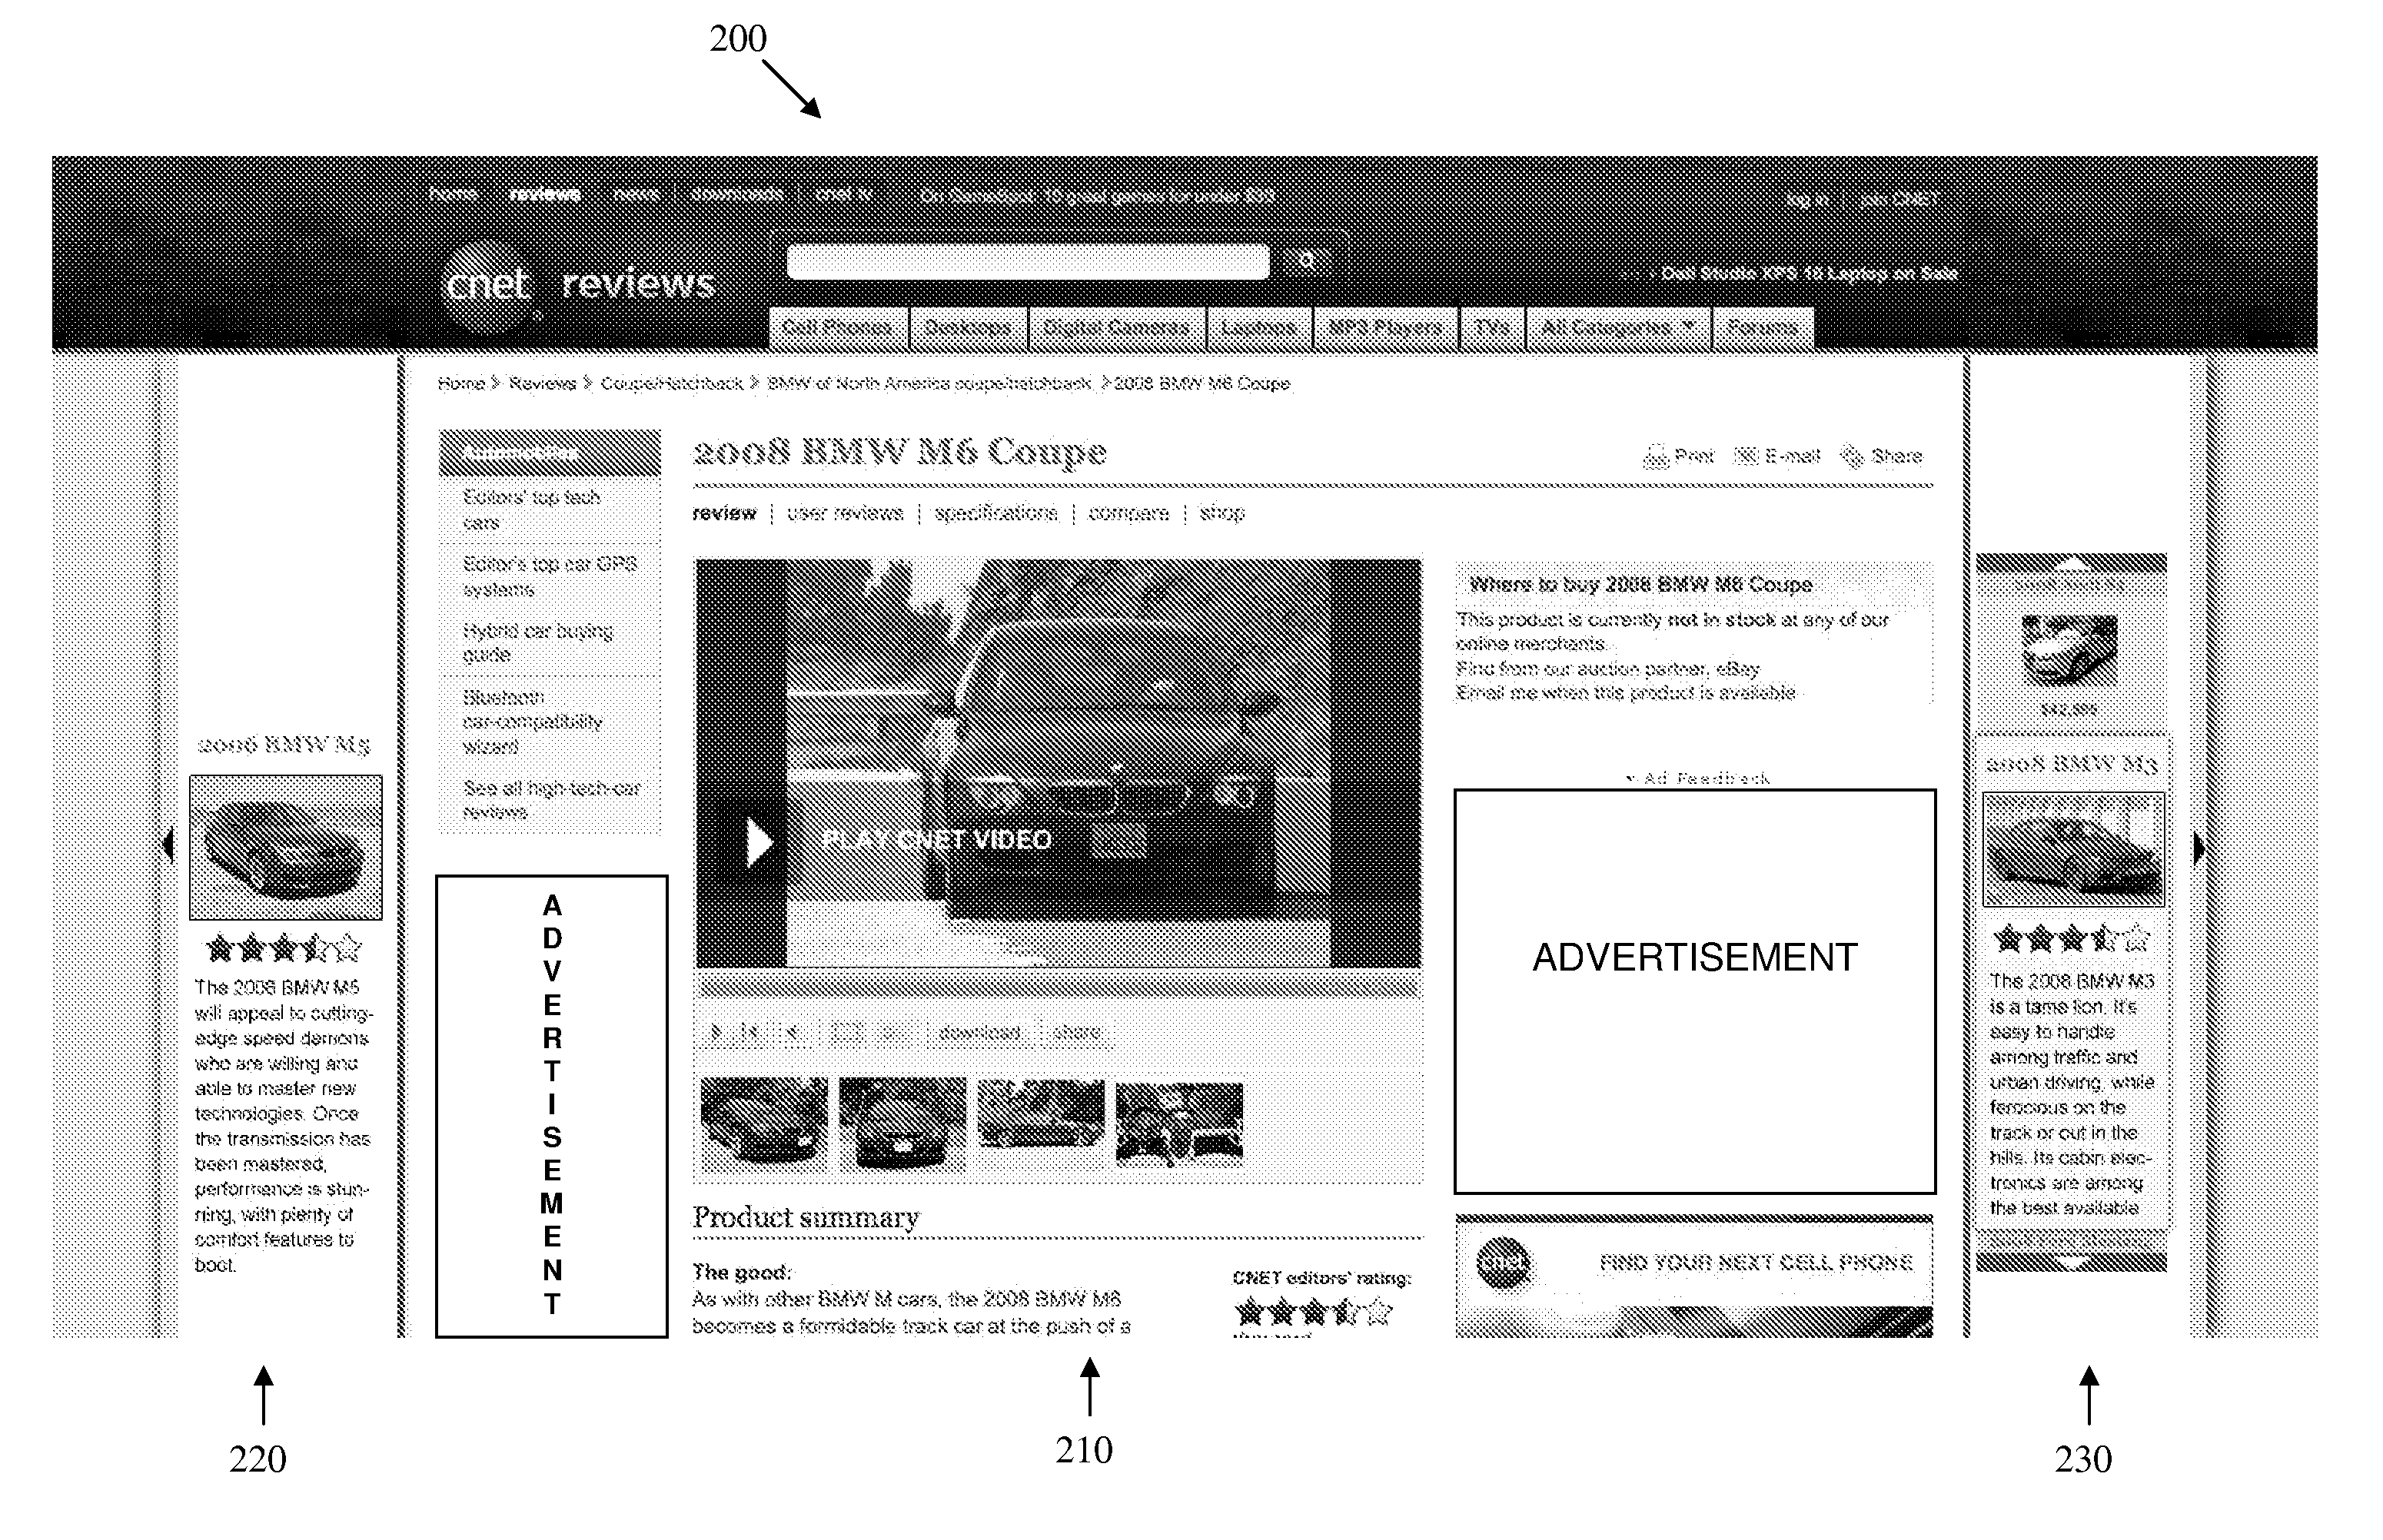 System and method for navigating a collection of editorial content